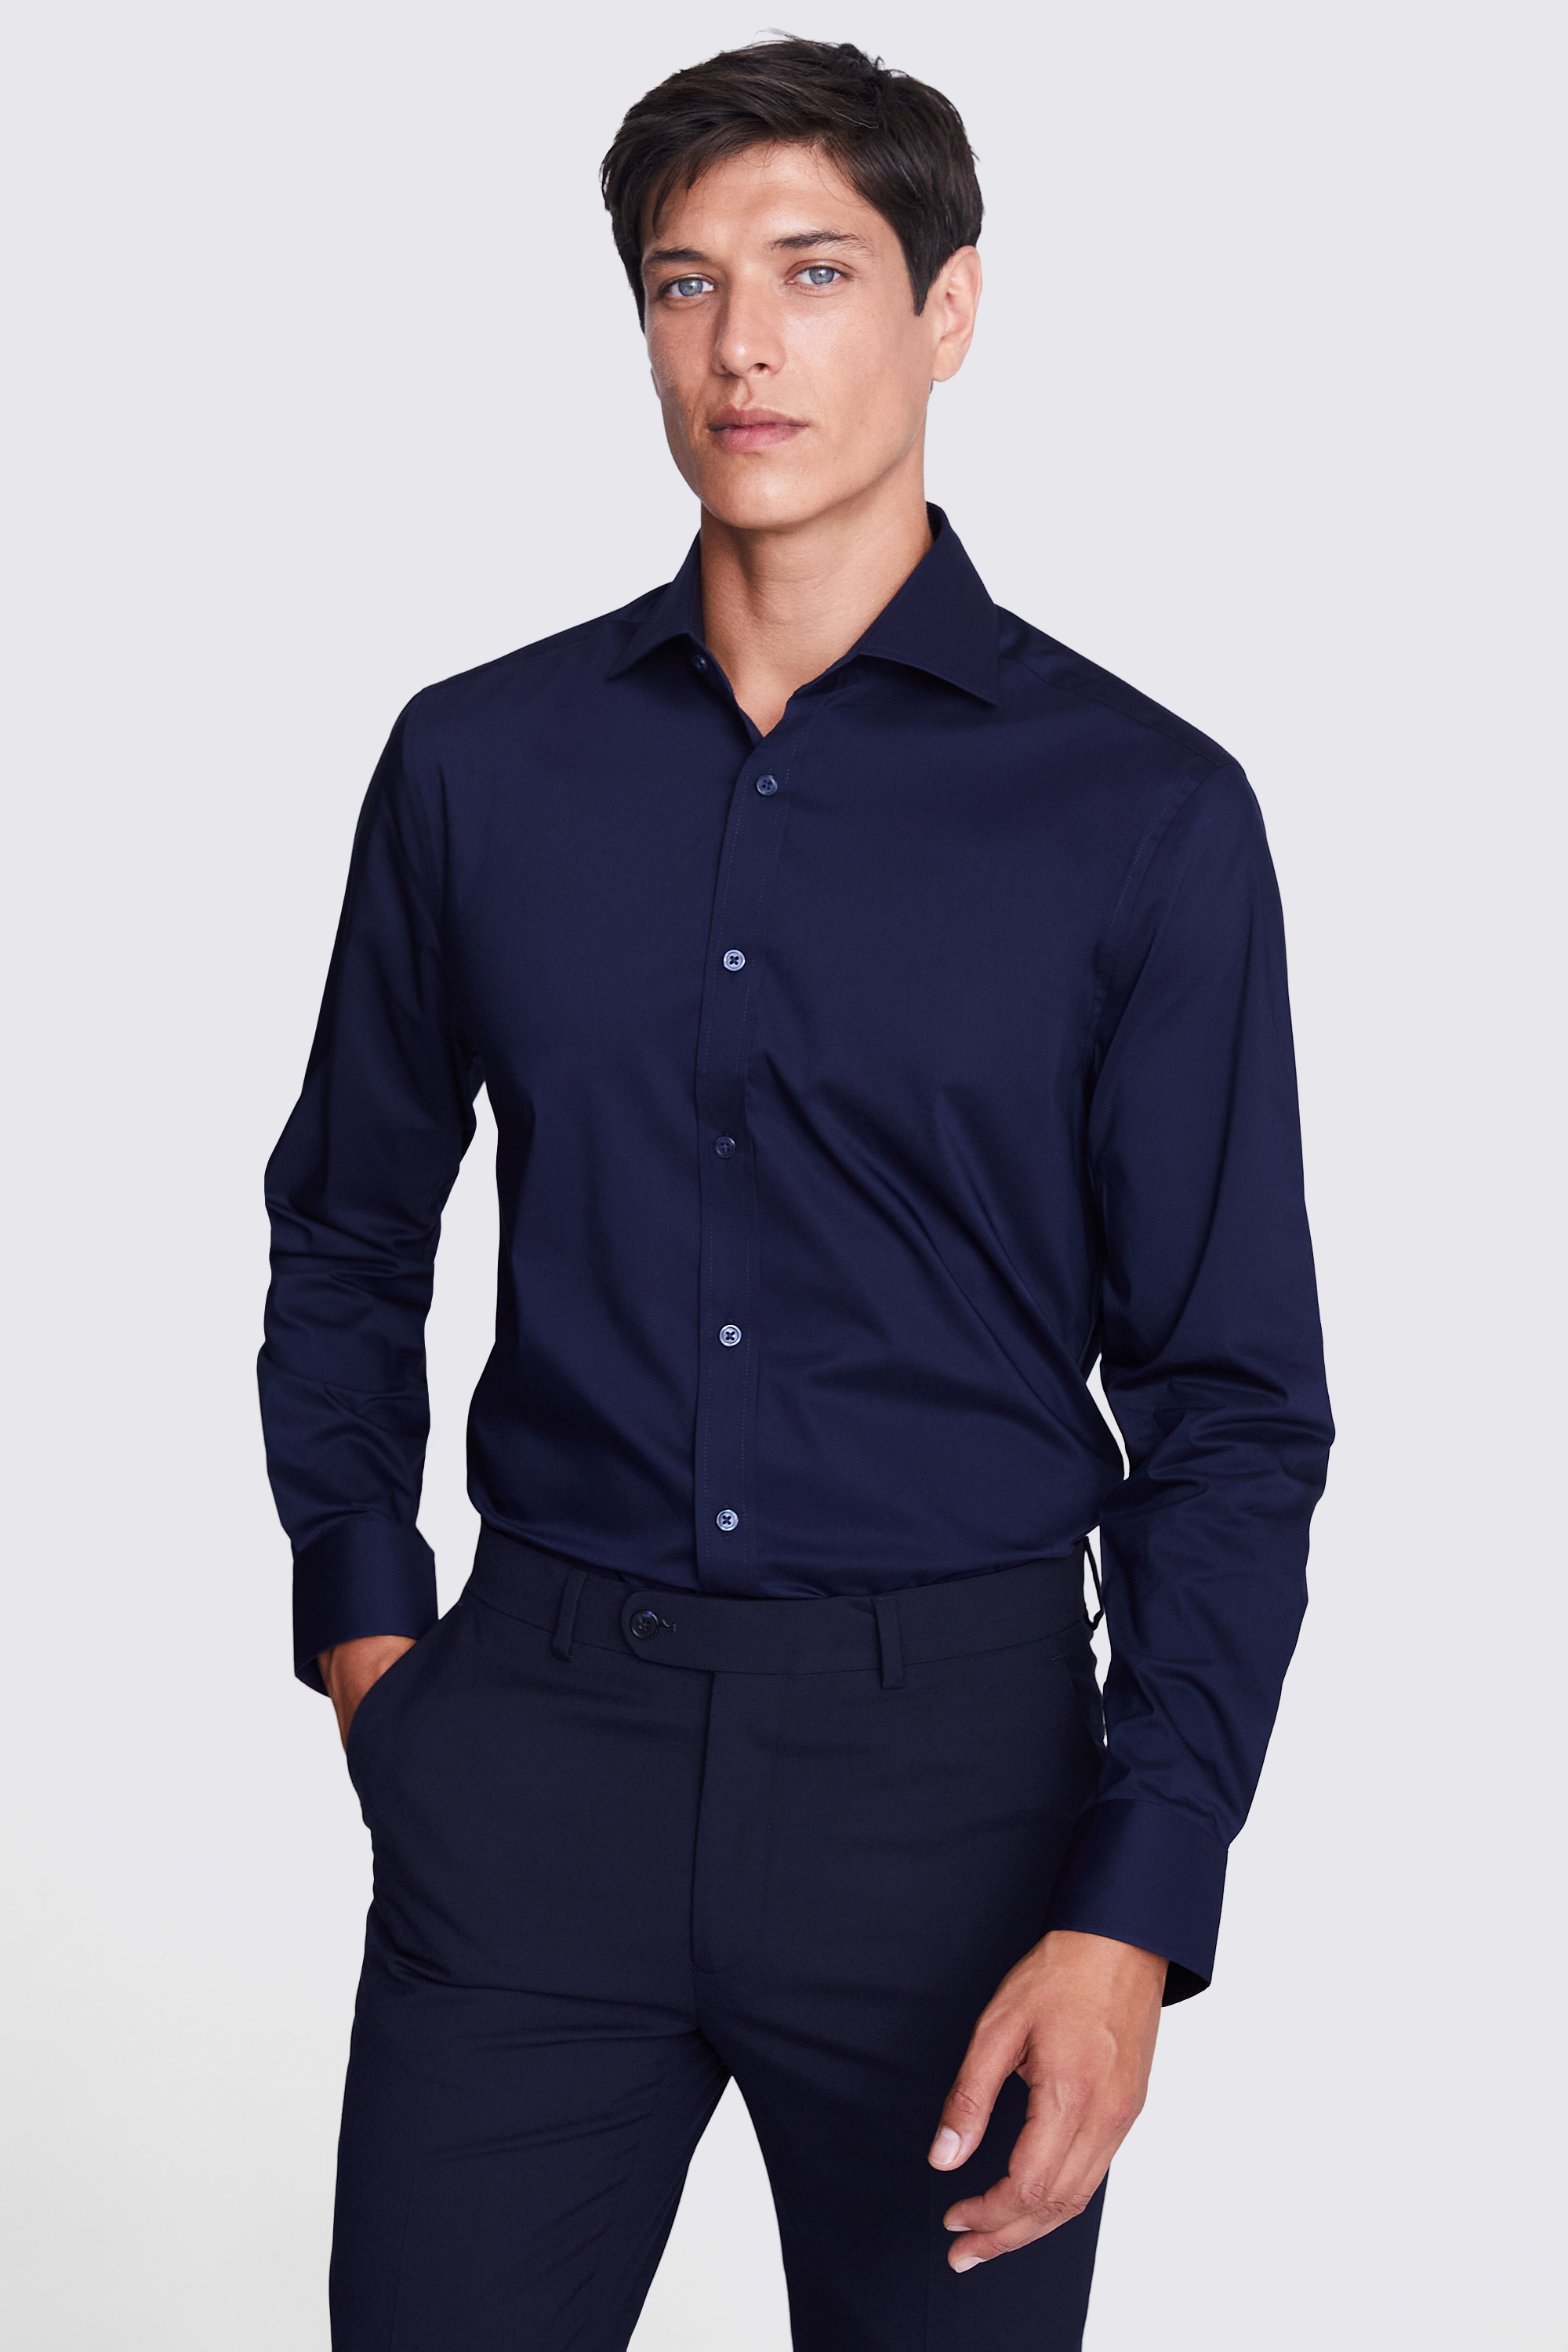 Tailored Fit Navy Stretch Shirt | Buy Online at Moss